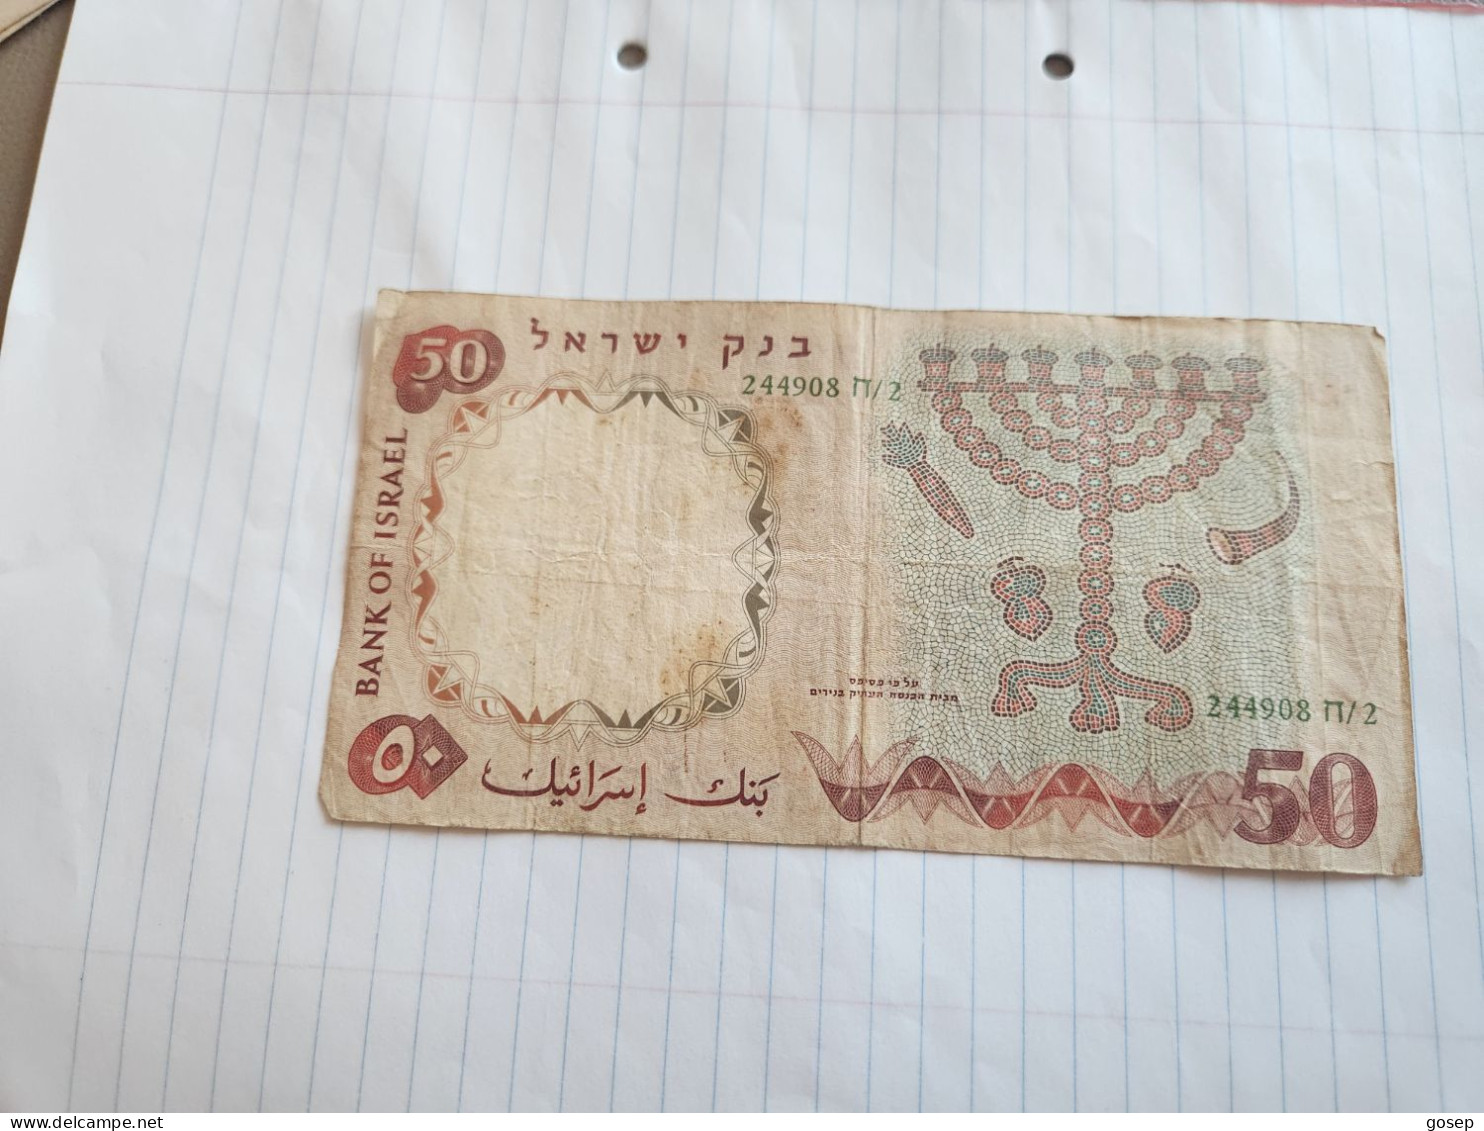 Israel-50 LIROT BOY AND GIRL-(1960)-(GREEN NUMBER)-(189)-(244908-ח/2)-USED-crease/stain-BANK NOTE - Israel